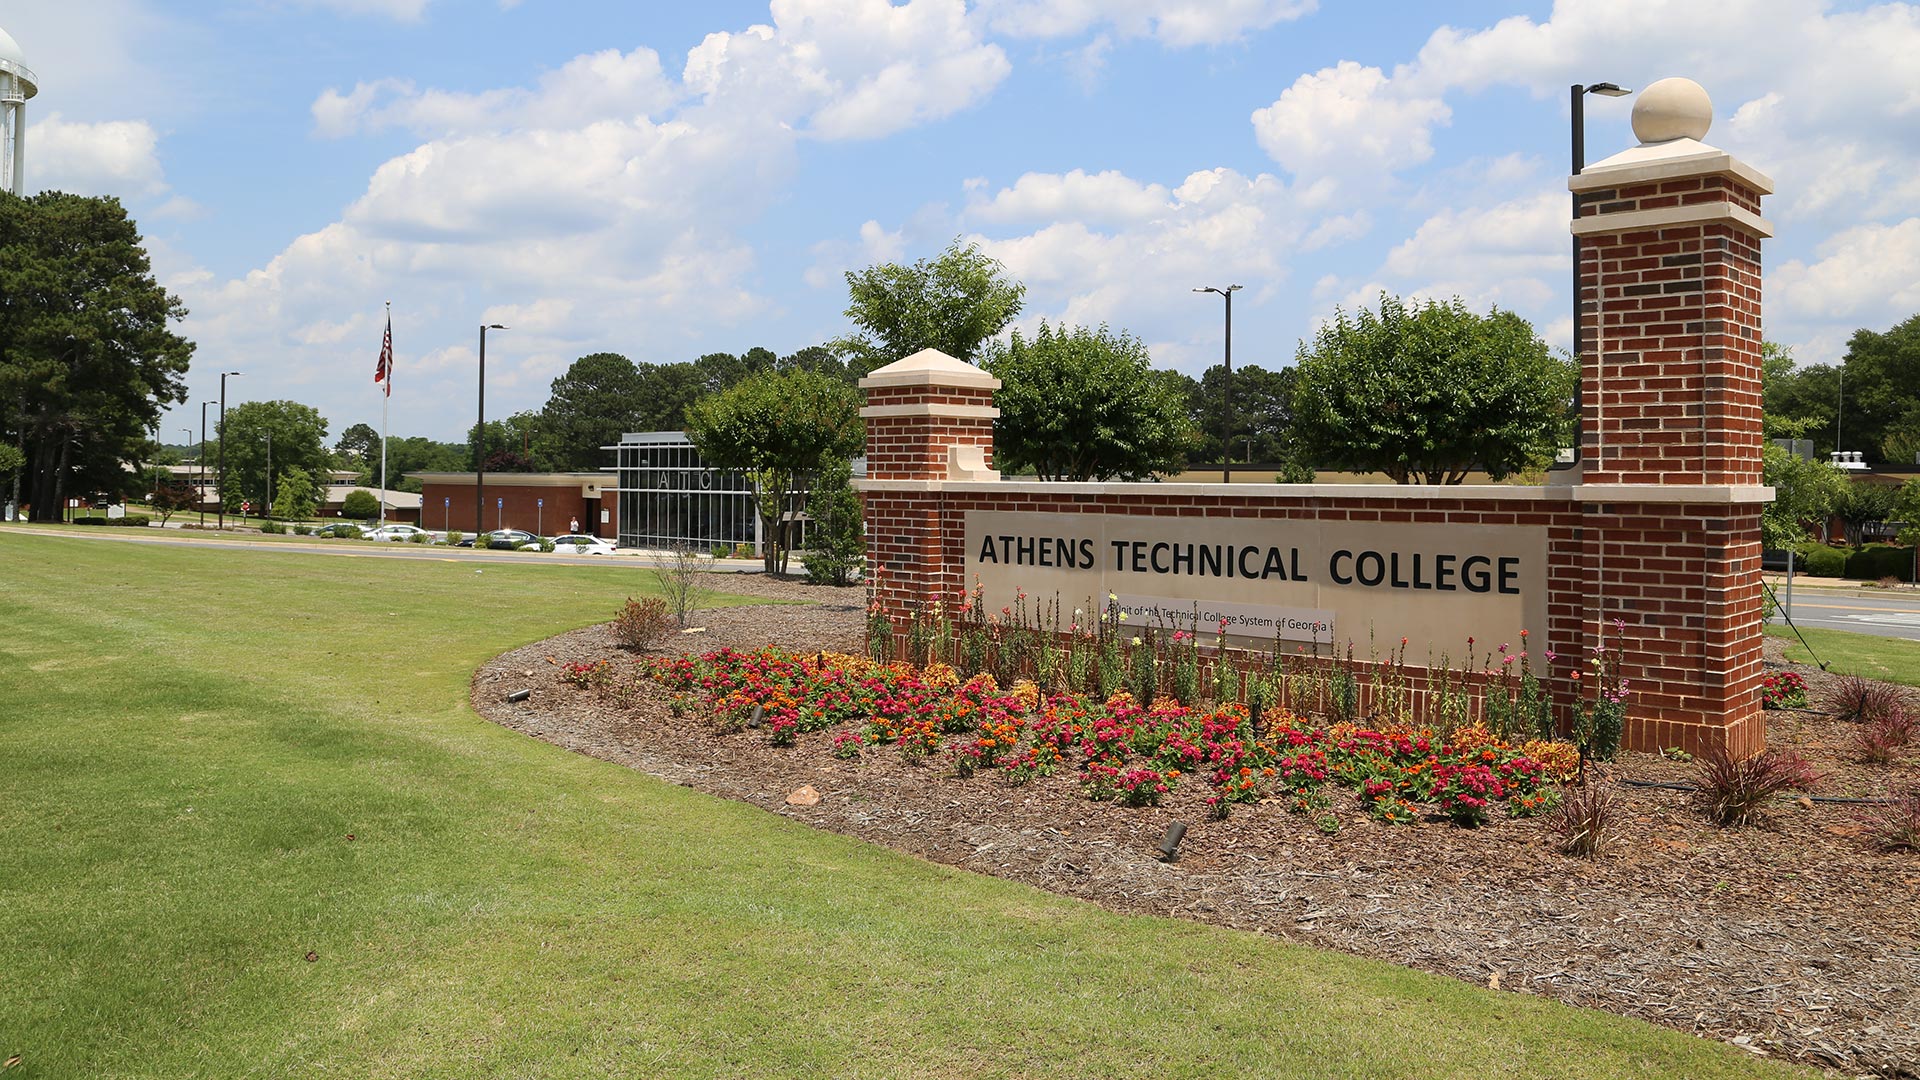 Athens Campus Athens Technical College